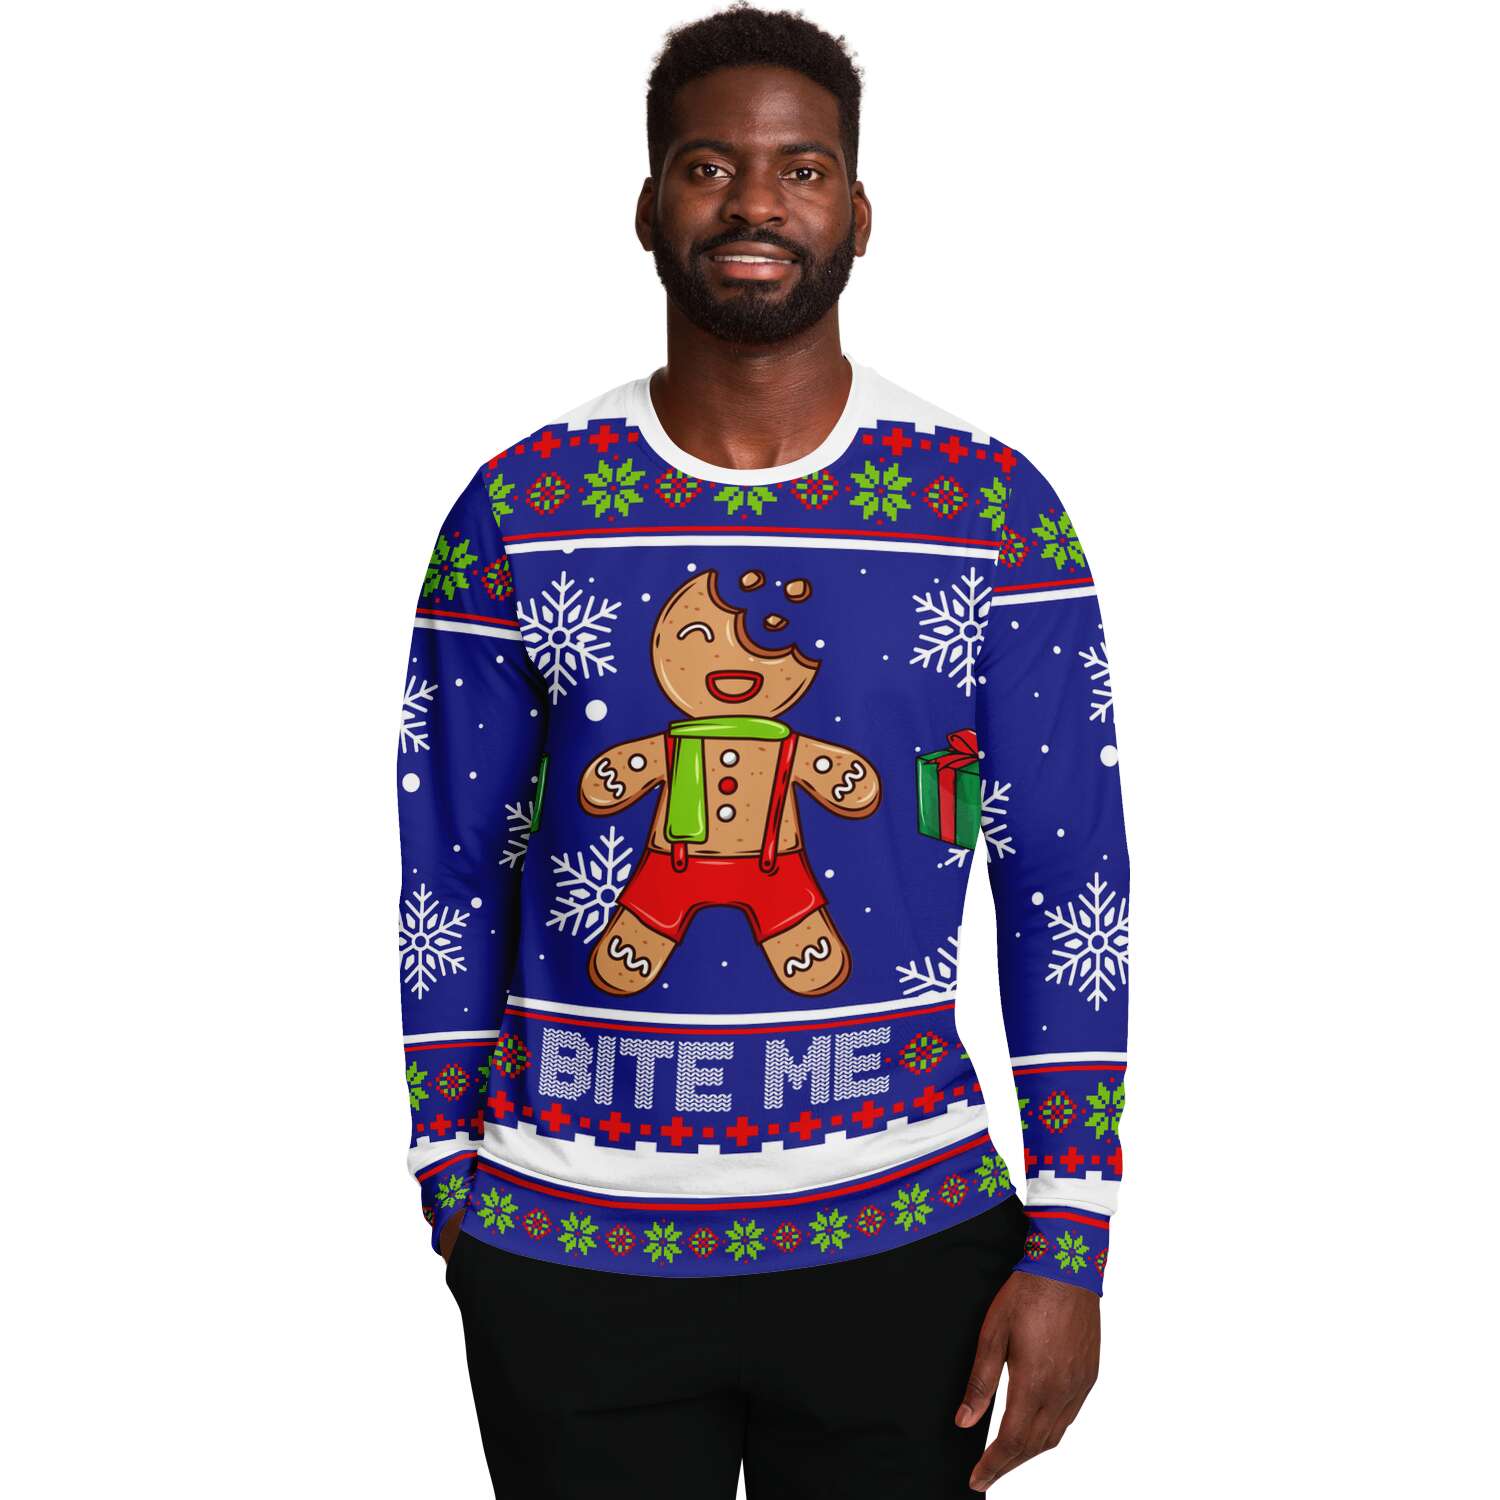 Bite me Gingerbread Ugly Christmas Sweater-grizzshop